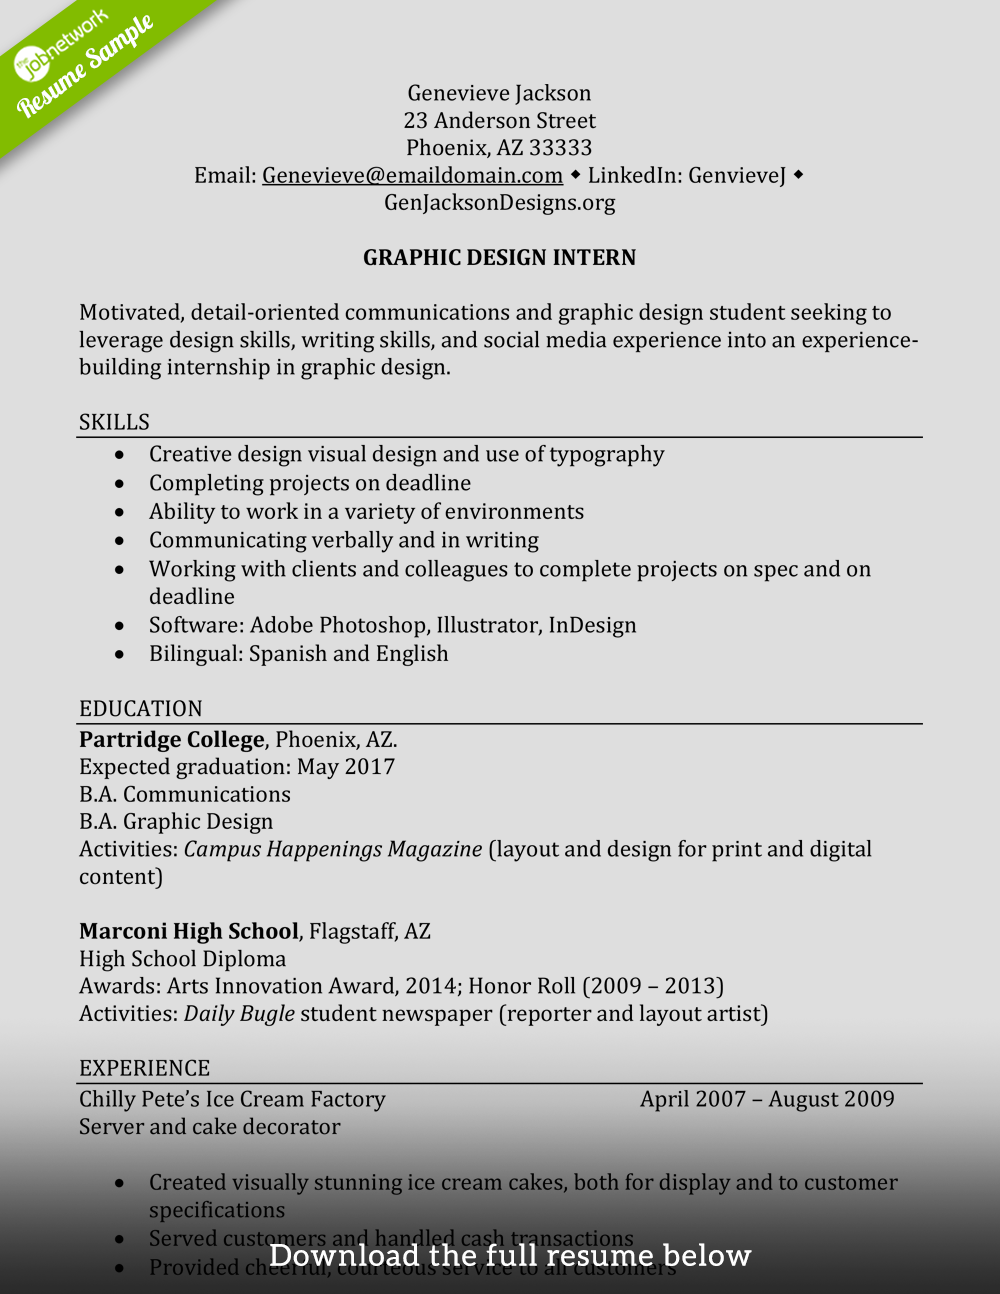 How to Write a Perfect Internship Resume (Examples Included)